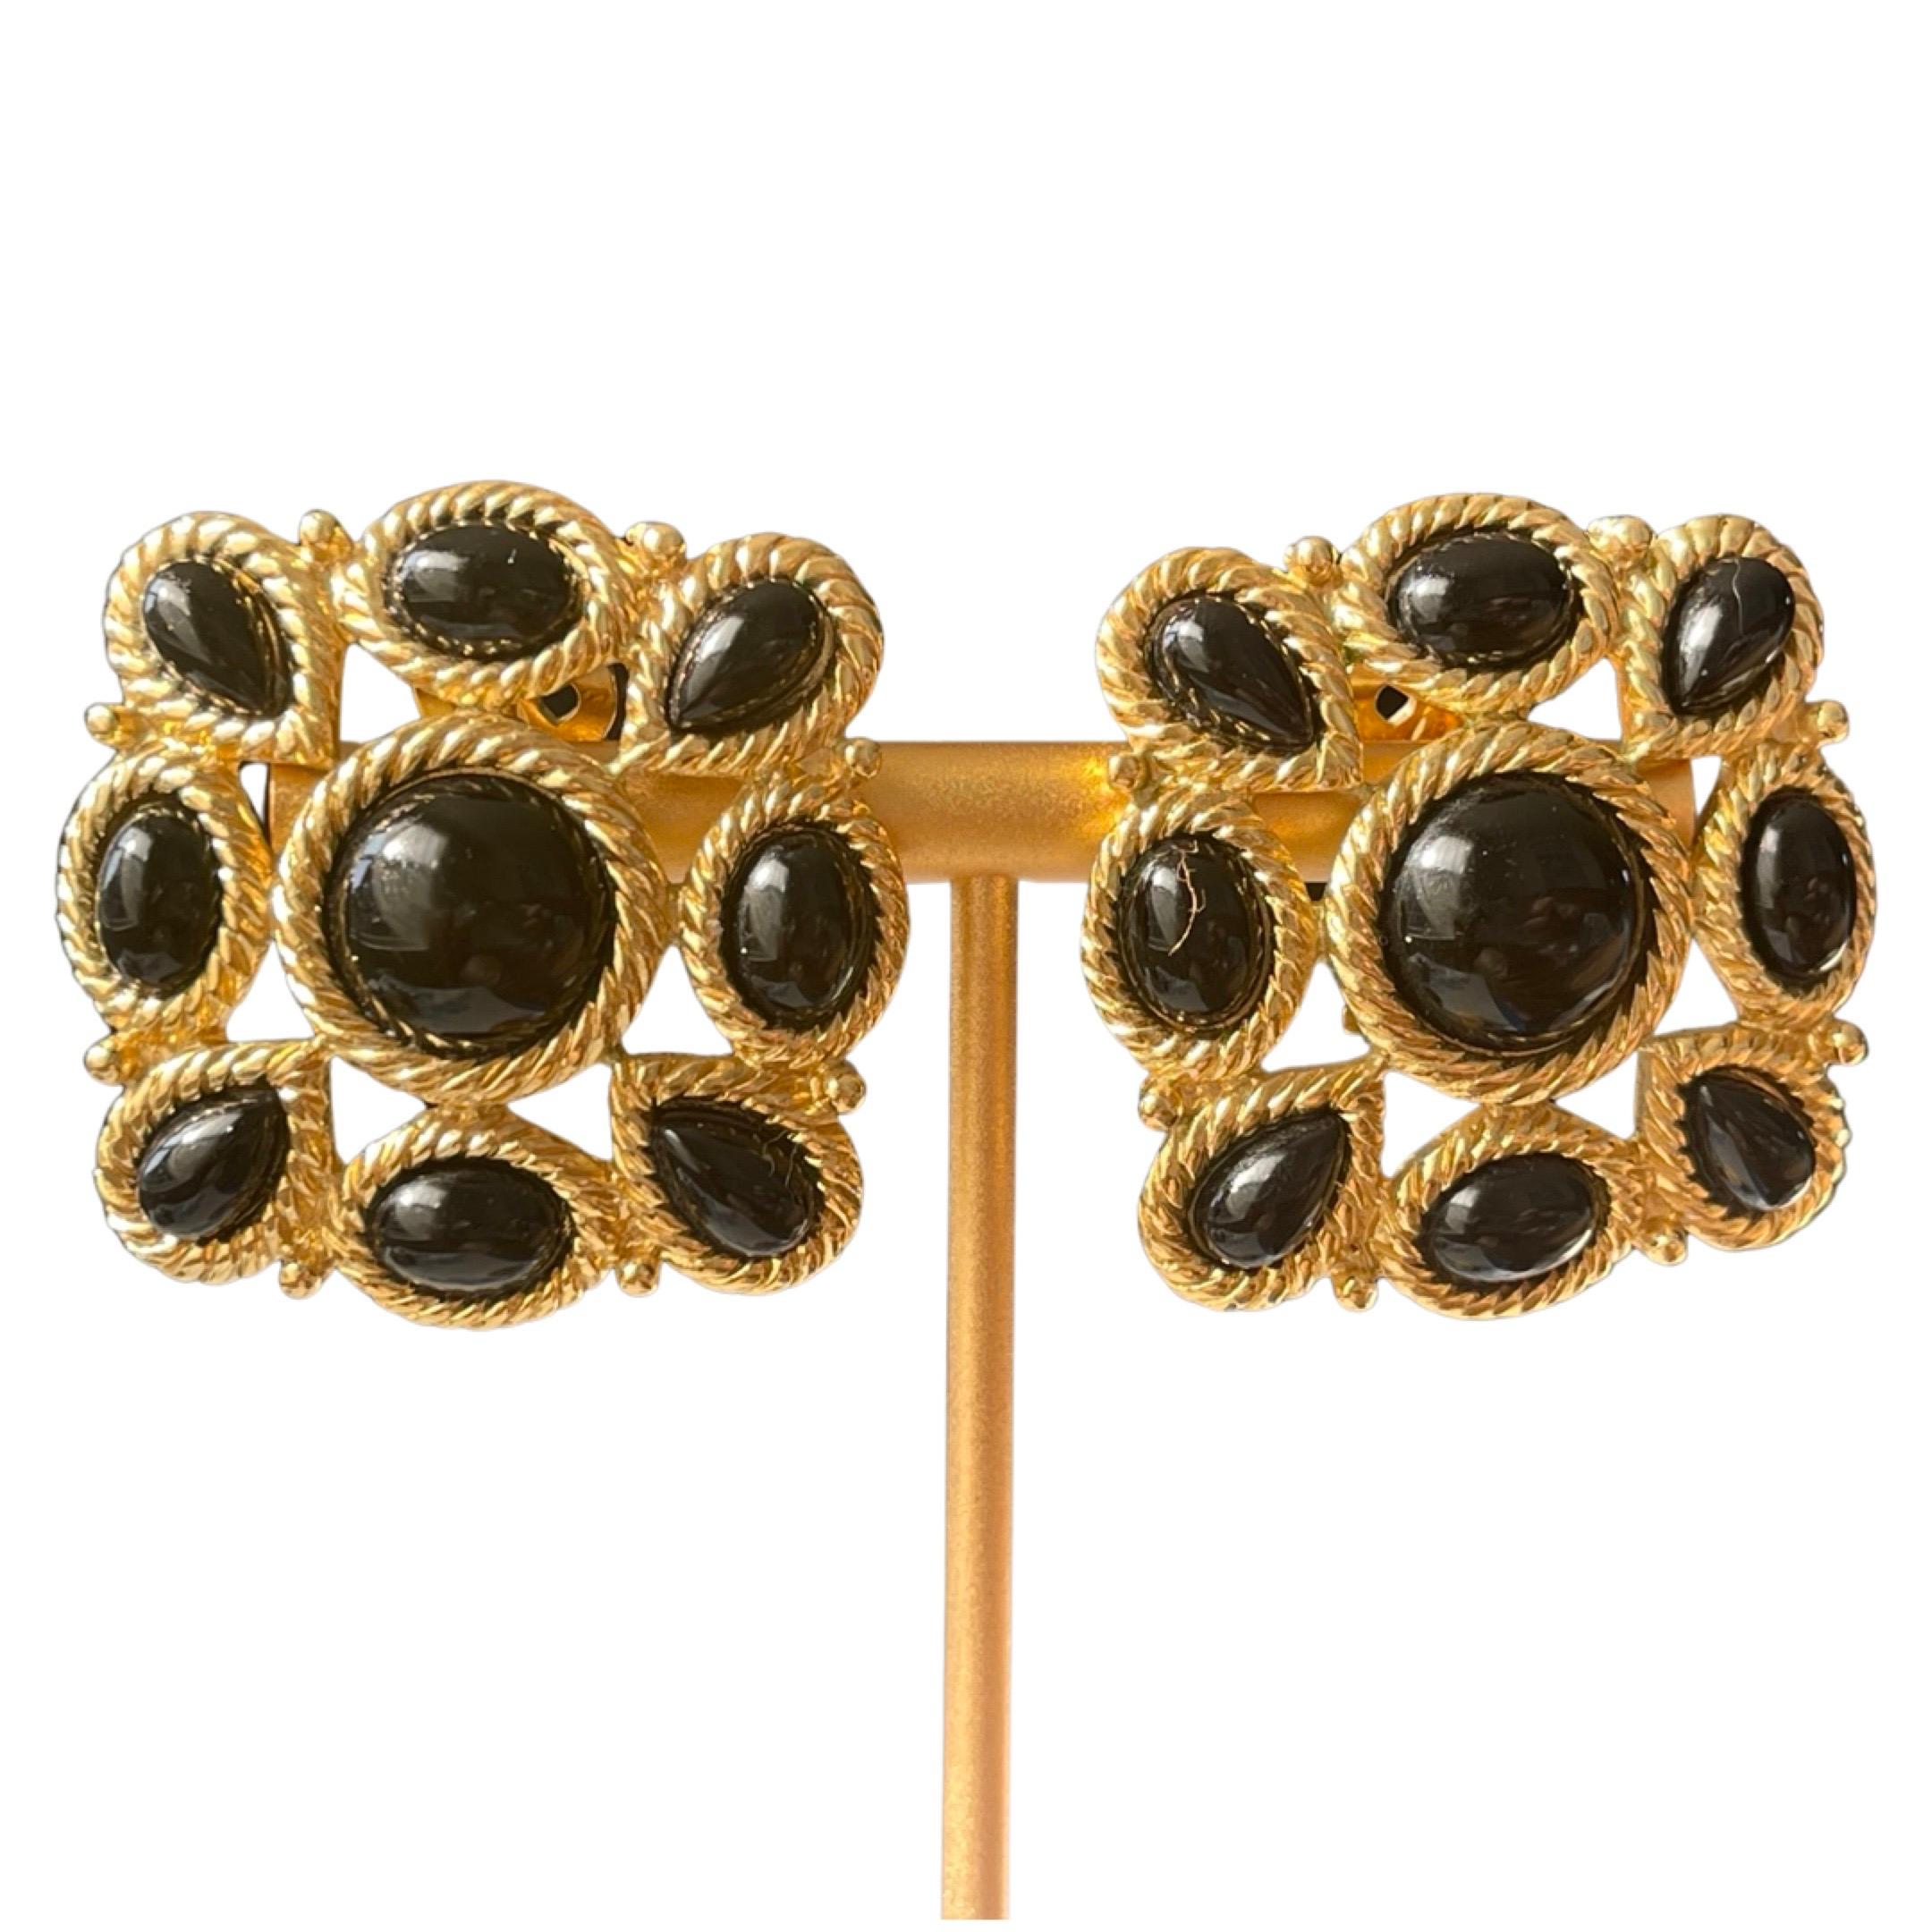 Modestly ornate these cabochon onyx, and the gold-tone filigree pair of Trifari earrings are incredibly elegant.  The black and gold along with the square style is the quintessential piece of jewelry, that gives you that pulled-together appearance